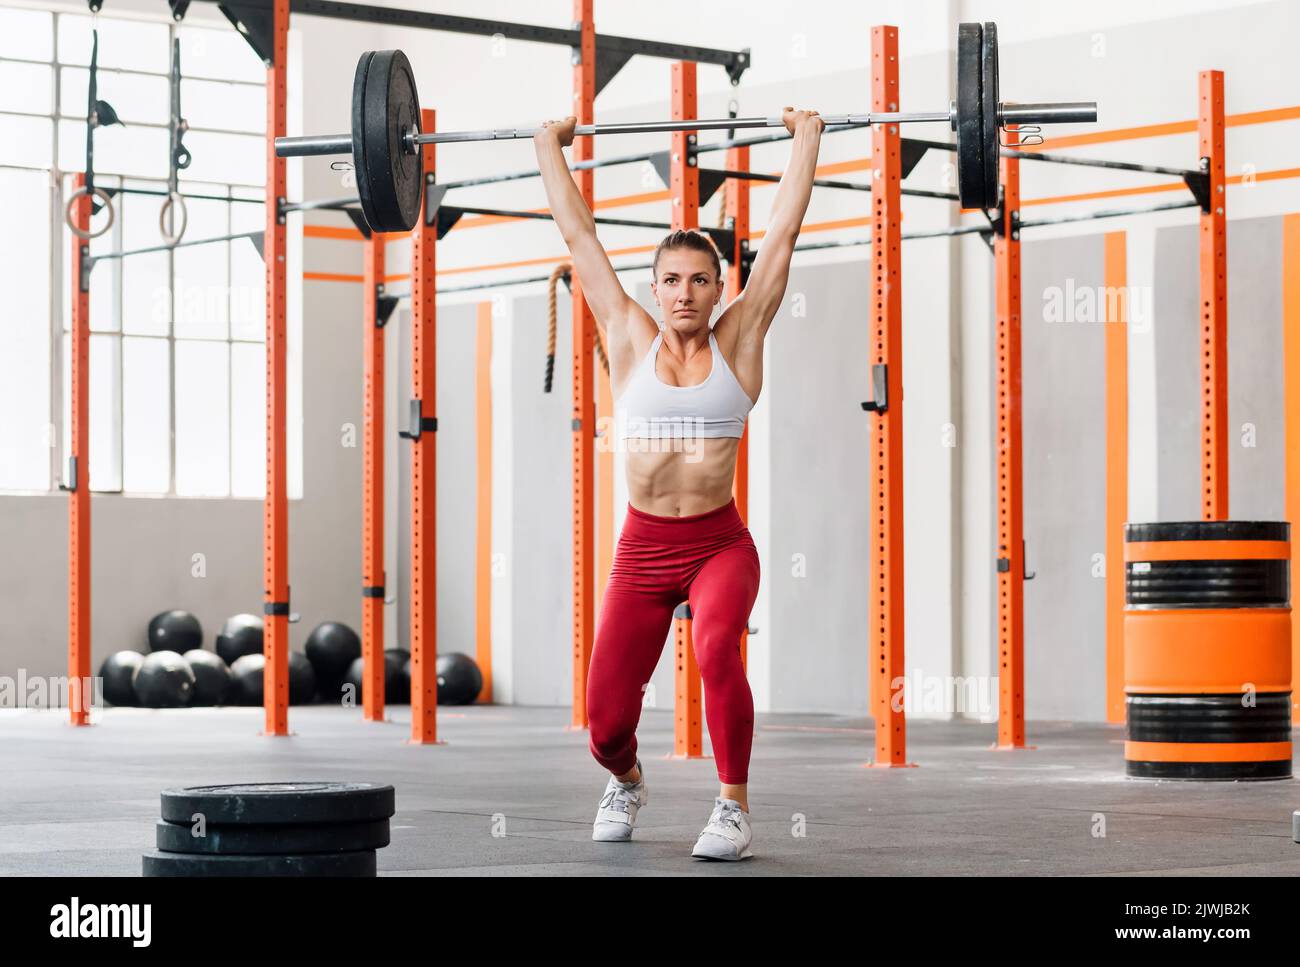 Full body strained sportswoman lifting heavy barbell over head and lunging while doing split jerk exercise during intense weightlifting training in gy Stock Photo